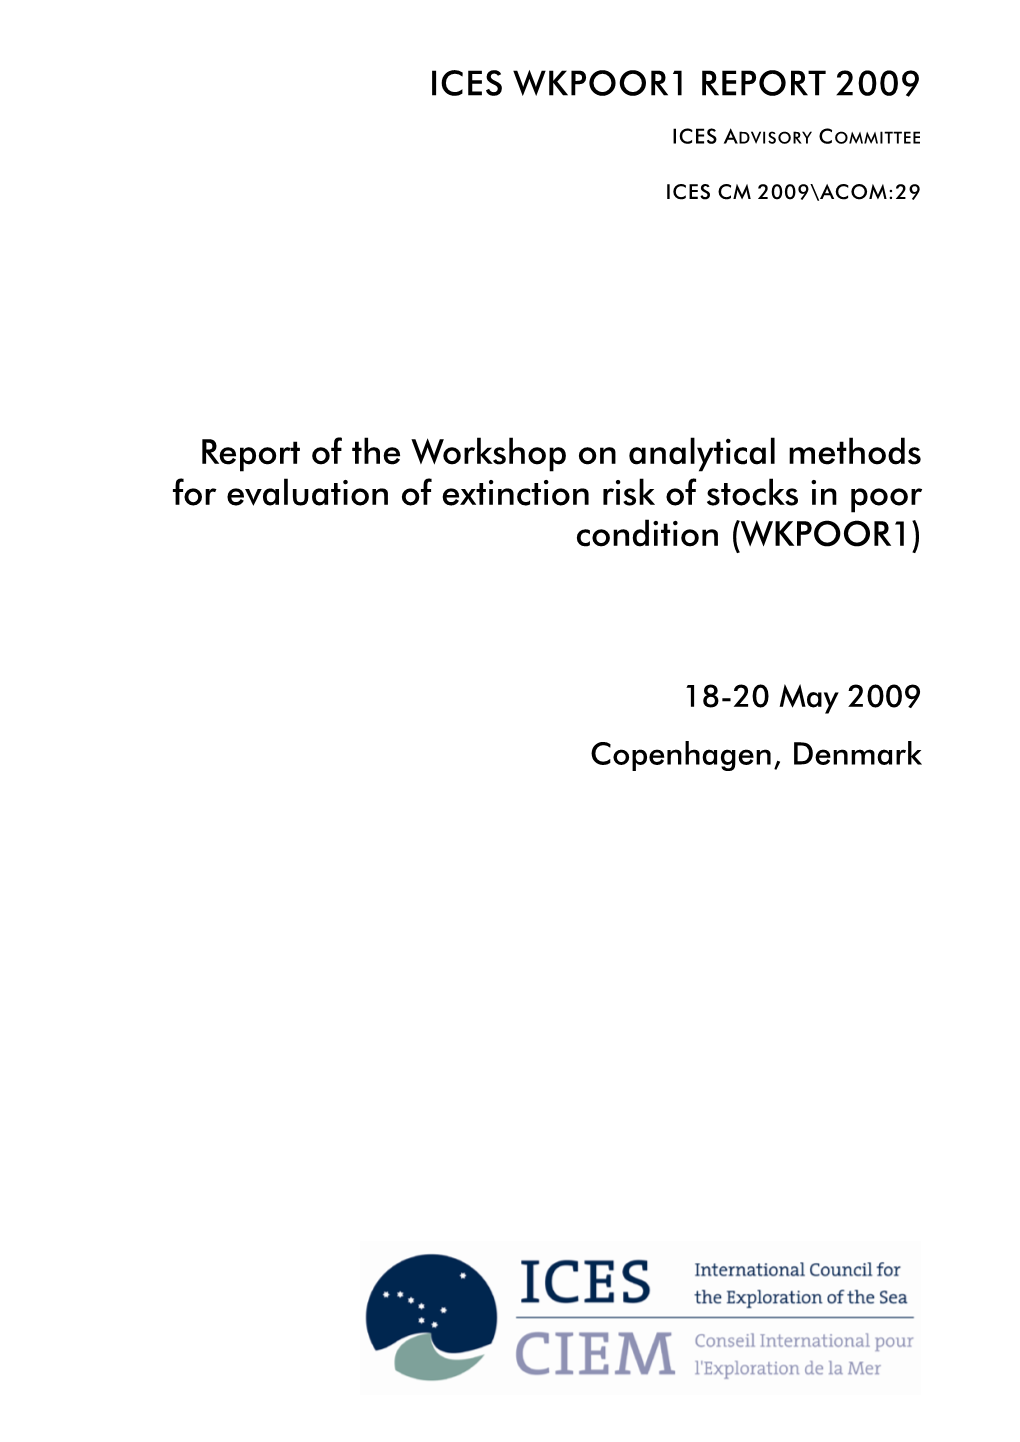 Report of the Workshop on Analytical Methods for Evaluation of Extinction Risk of Stocks in Poor Condition (WKPOOR1)